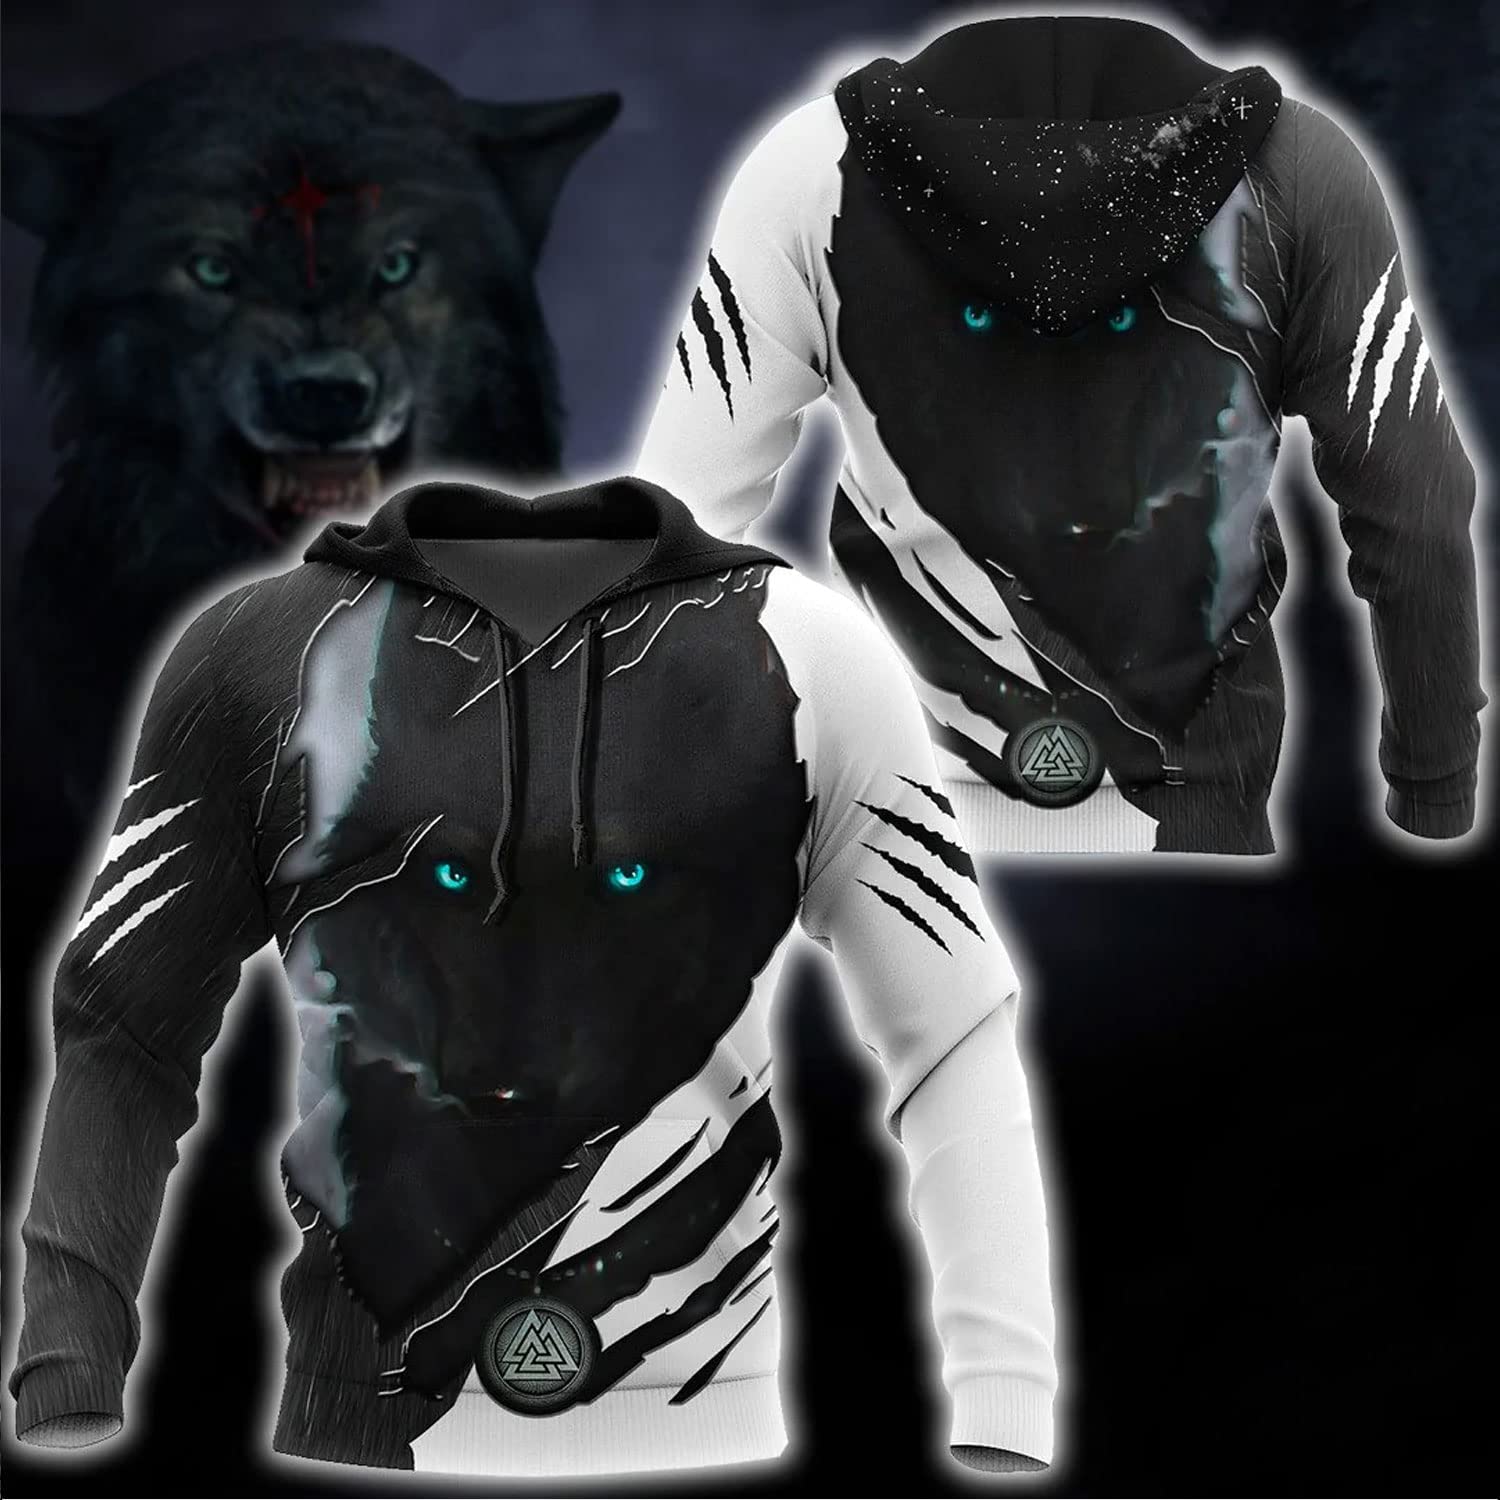 Wolf Winter Lover: Dark Night Cool W.o.l.f 3D All Over Print Shirt for Family Hunting, Pullover Hoodie, Hawaiian Shirt, and Sweatshirt – JOT1503